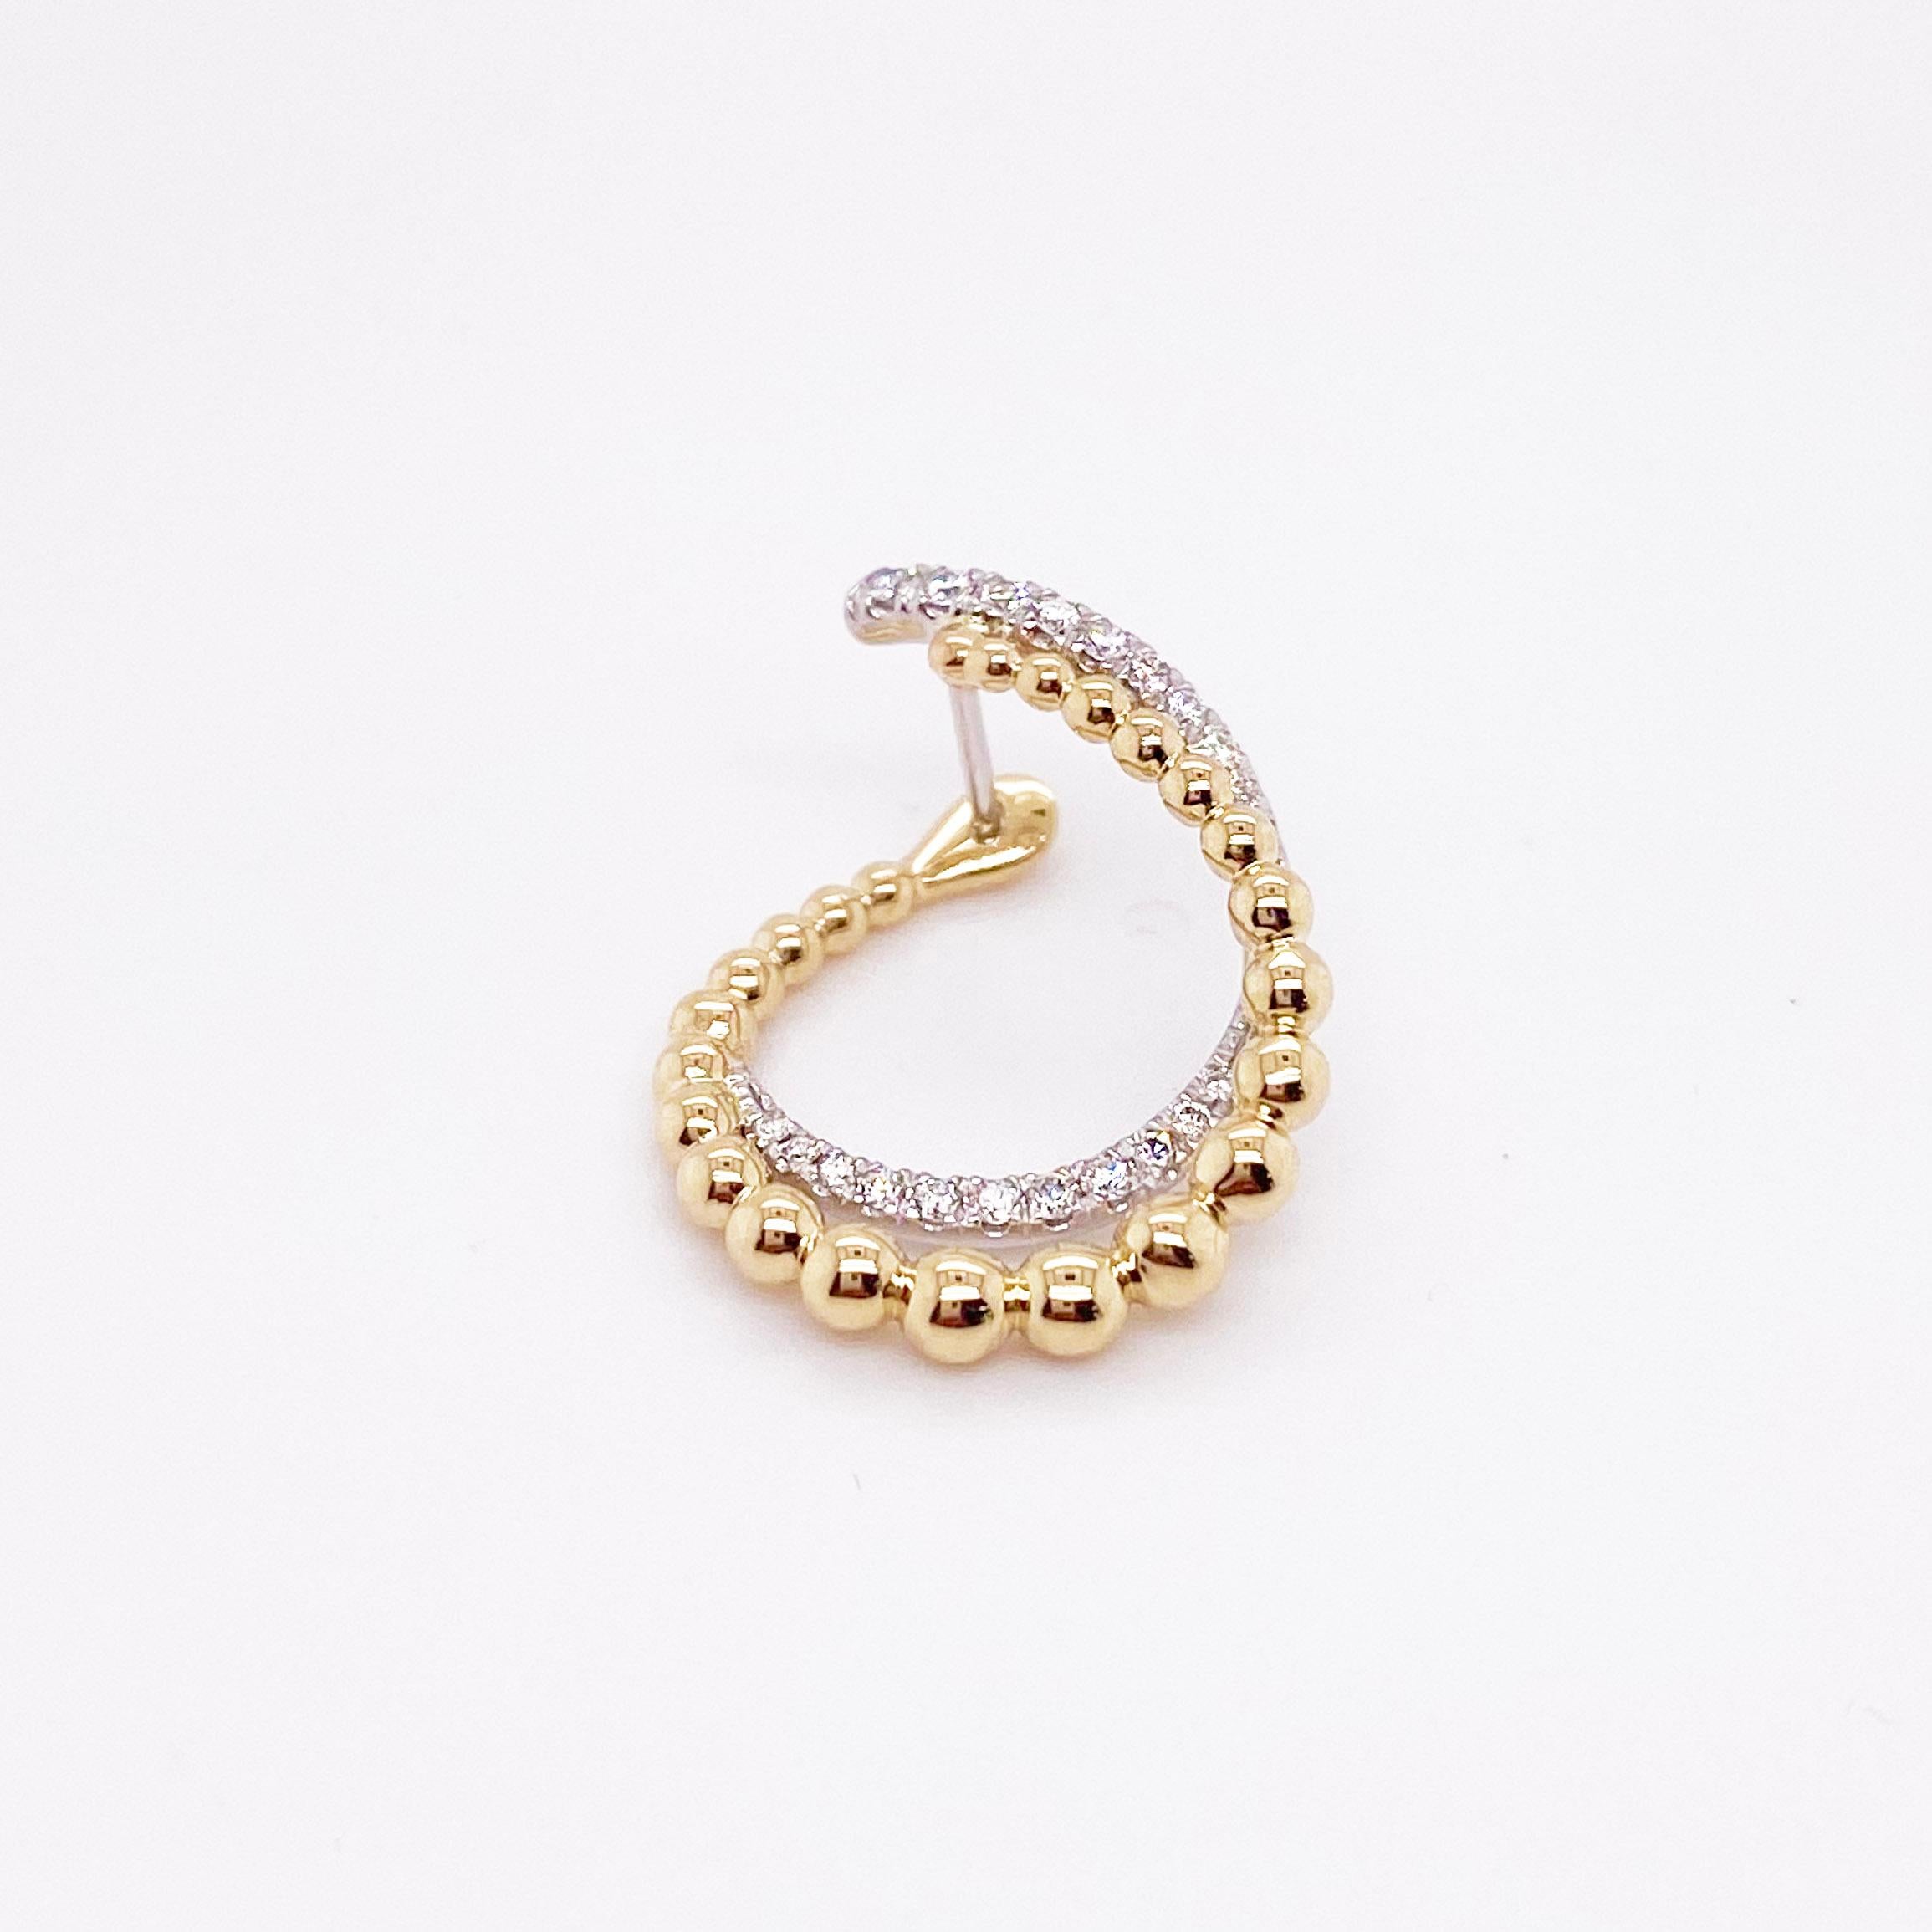 The fun, modern earrings have a very unique design with a gold beaded texture and bright white diamonds! The design appears to be in motion with the beaded row and diamonds wrapping around in a circle together. The earrings are made with genuine